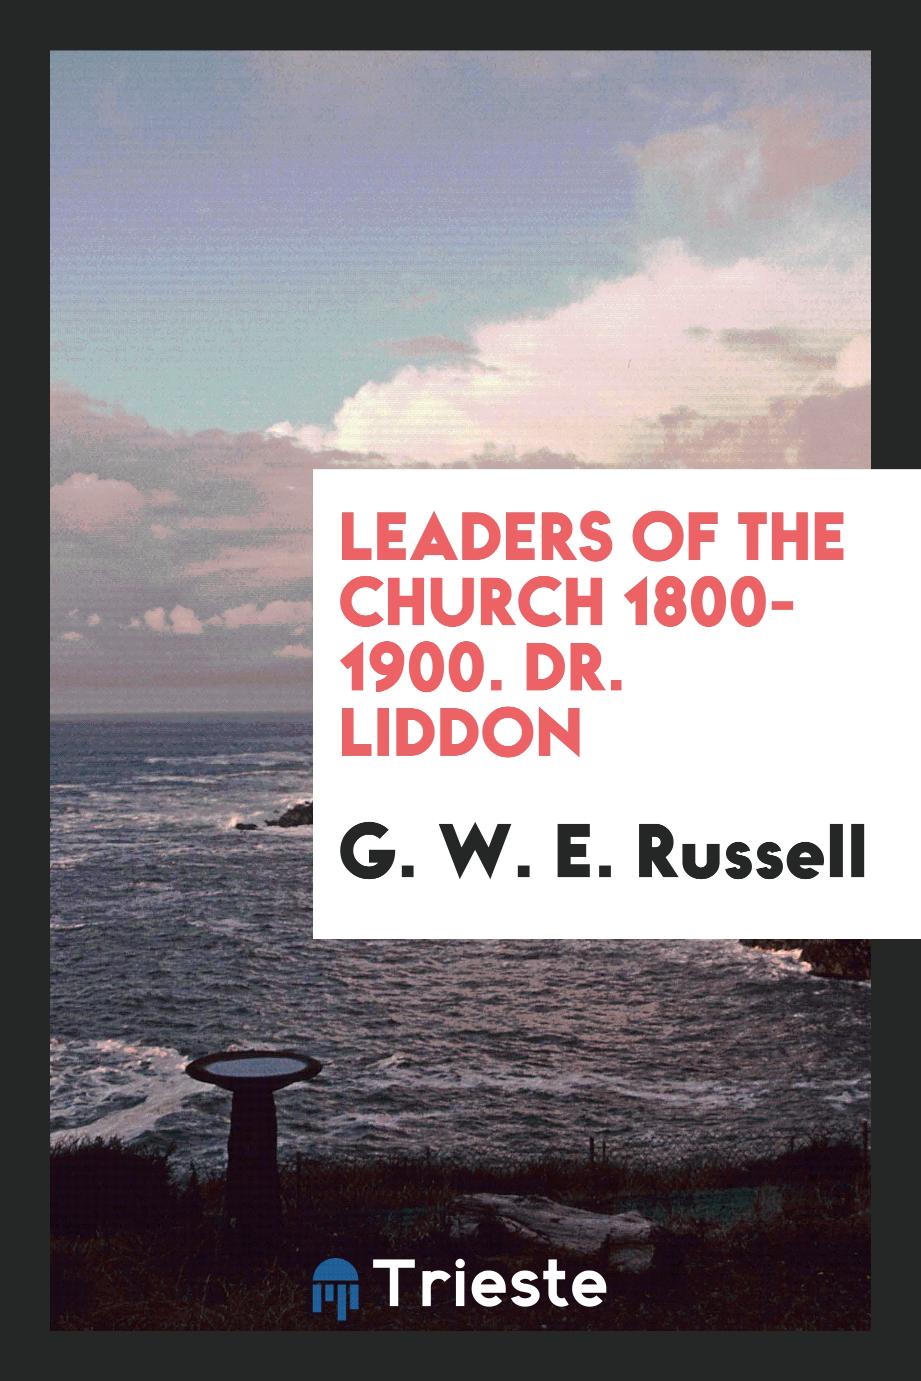 Leaders of the Church 1800-1900. Dr. Liddon